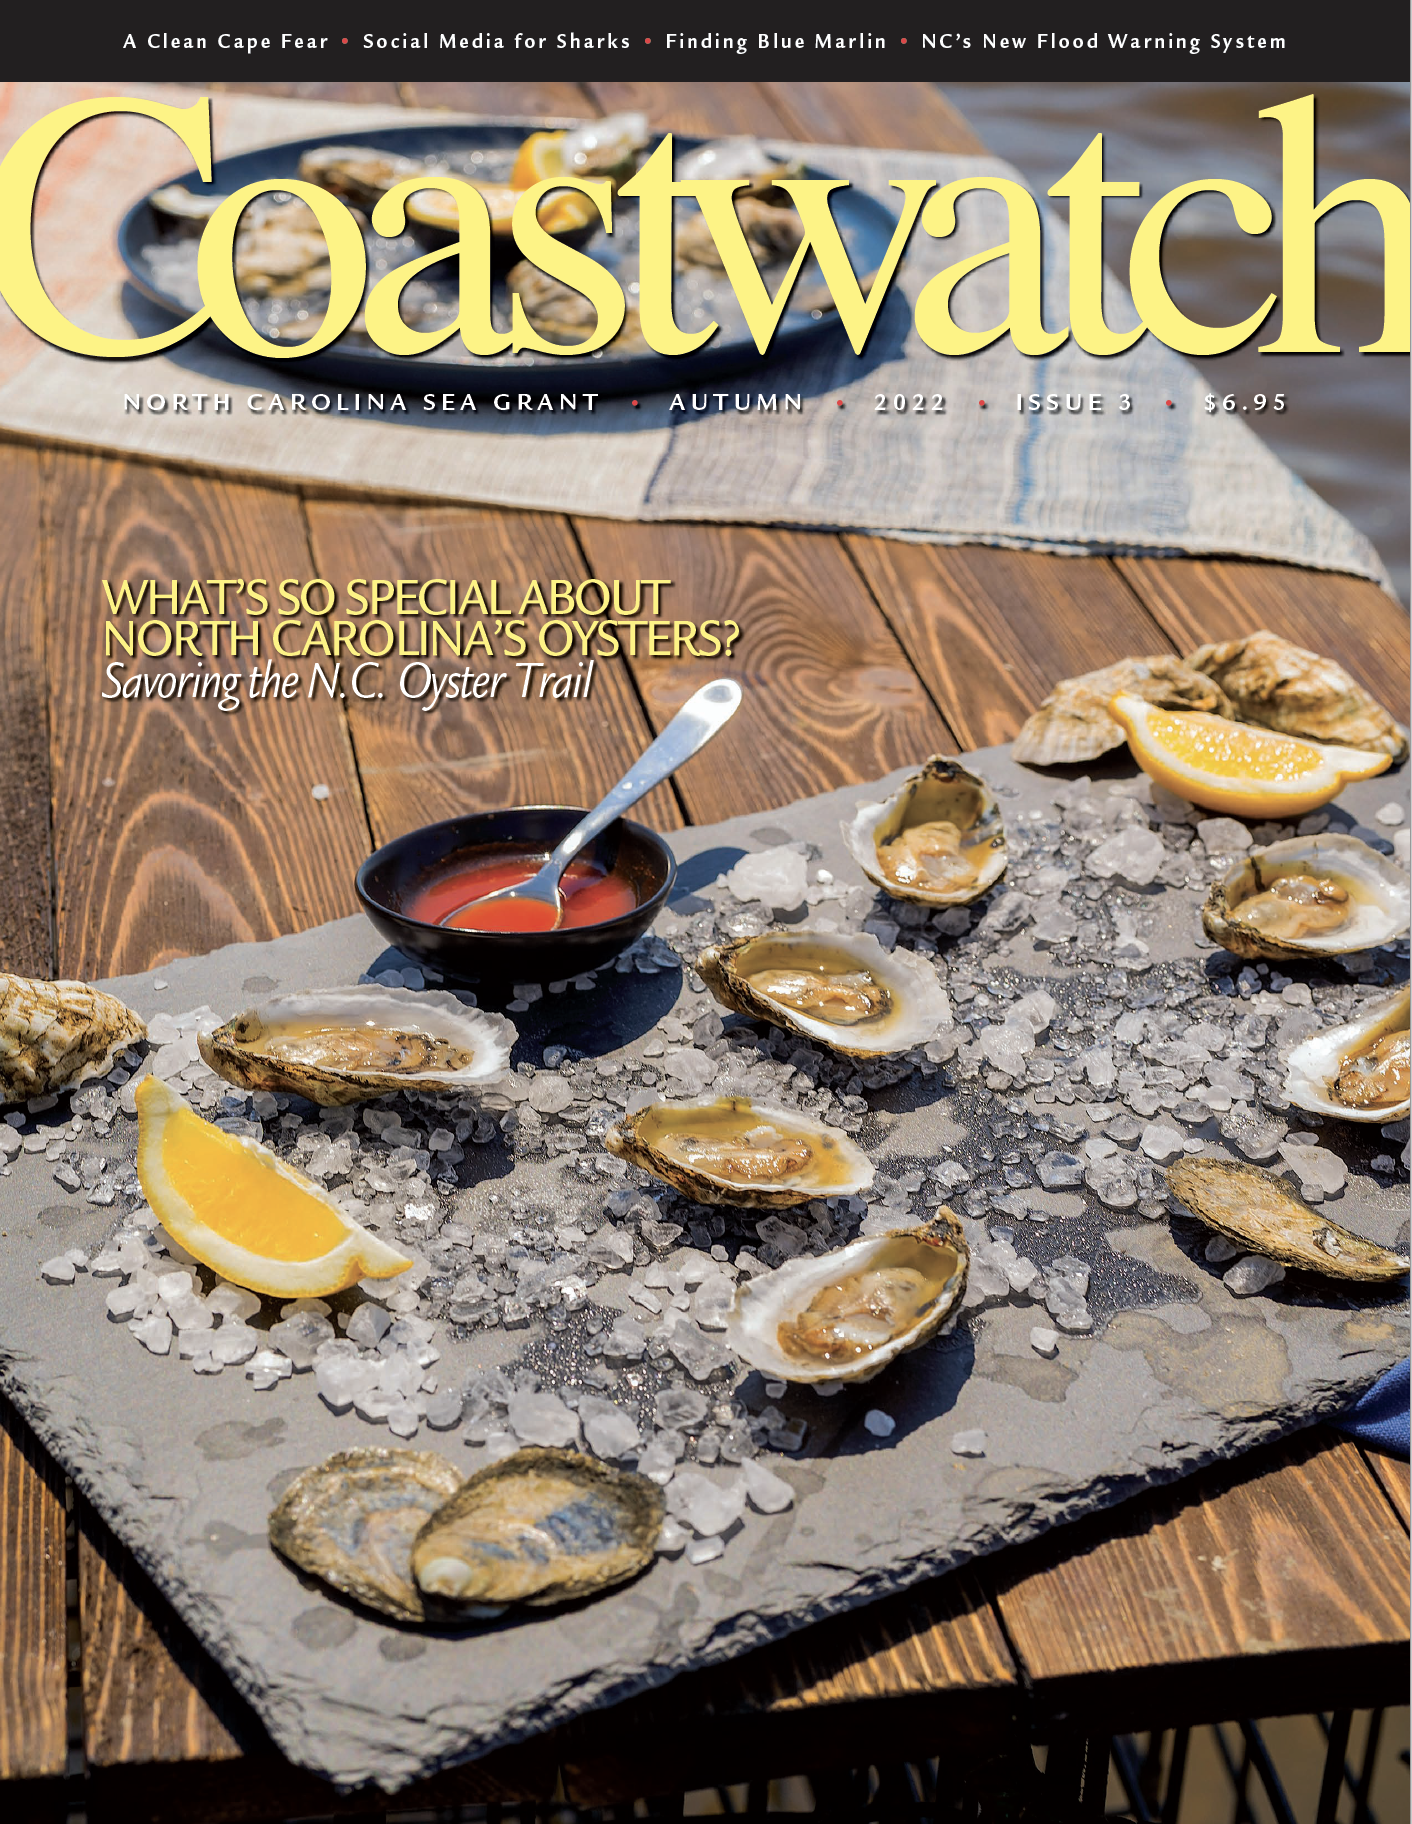 image: oyster spread on the Fall 2022 Coastwatch cover.